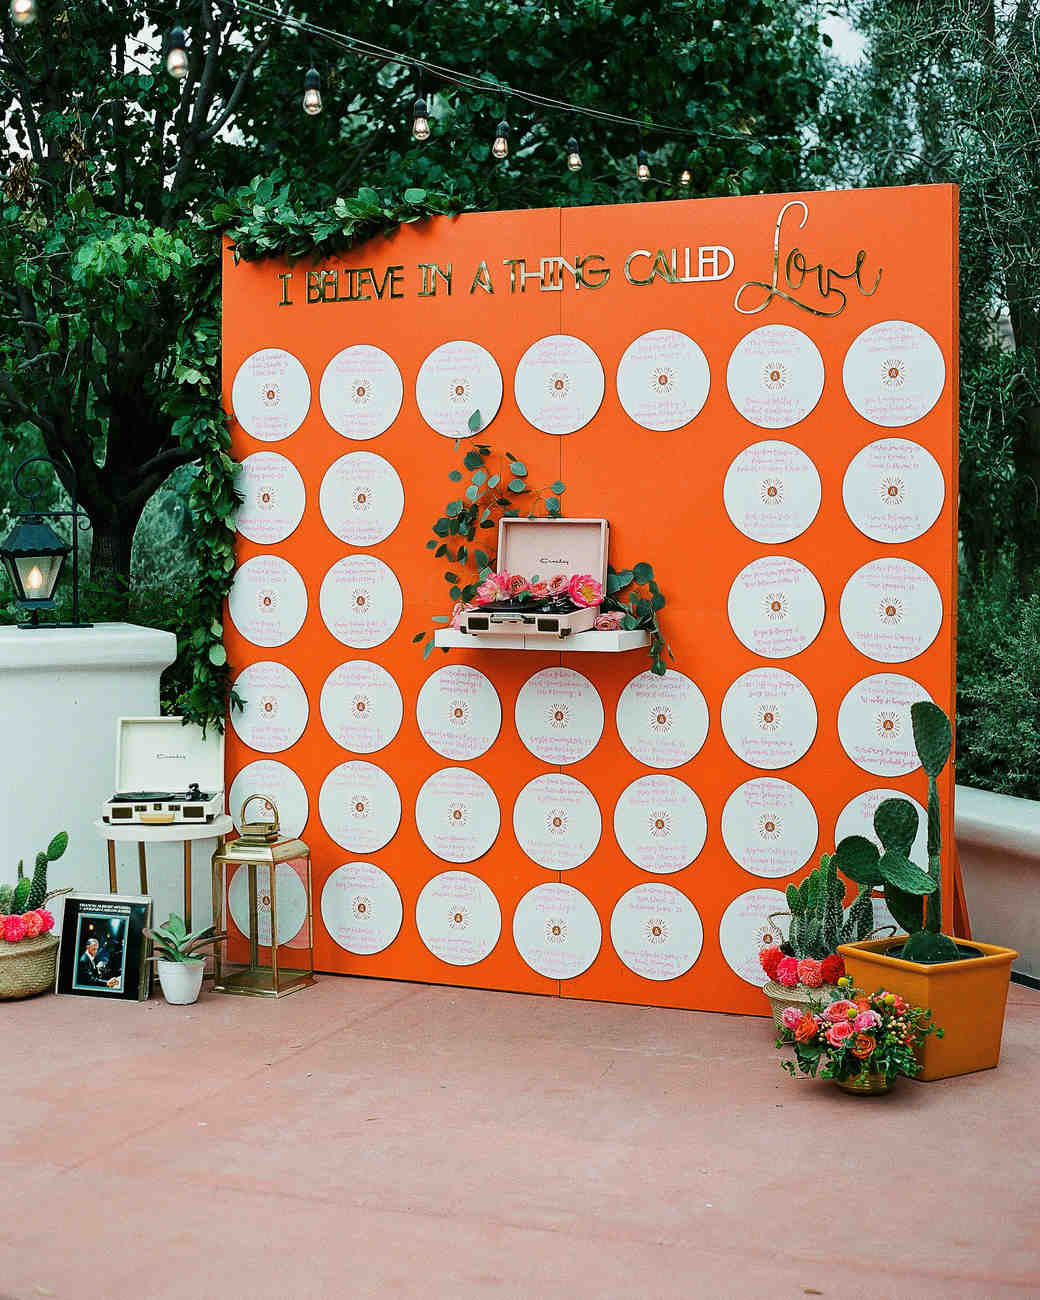 25 Unique Wedding Seating Charts to Guide Guests to Their Tables